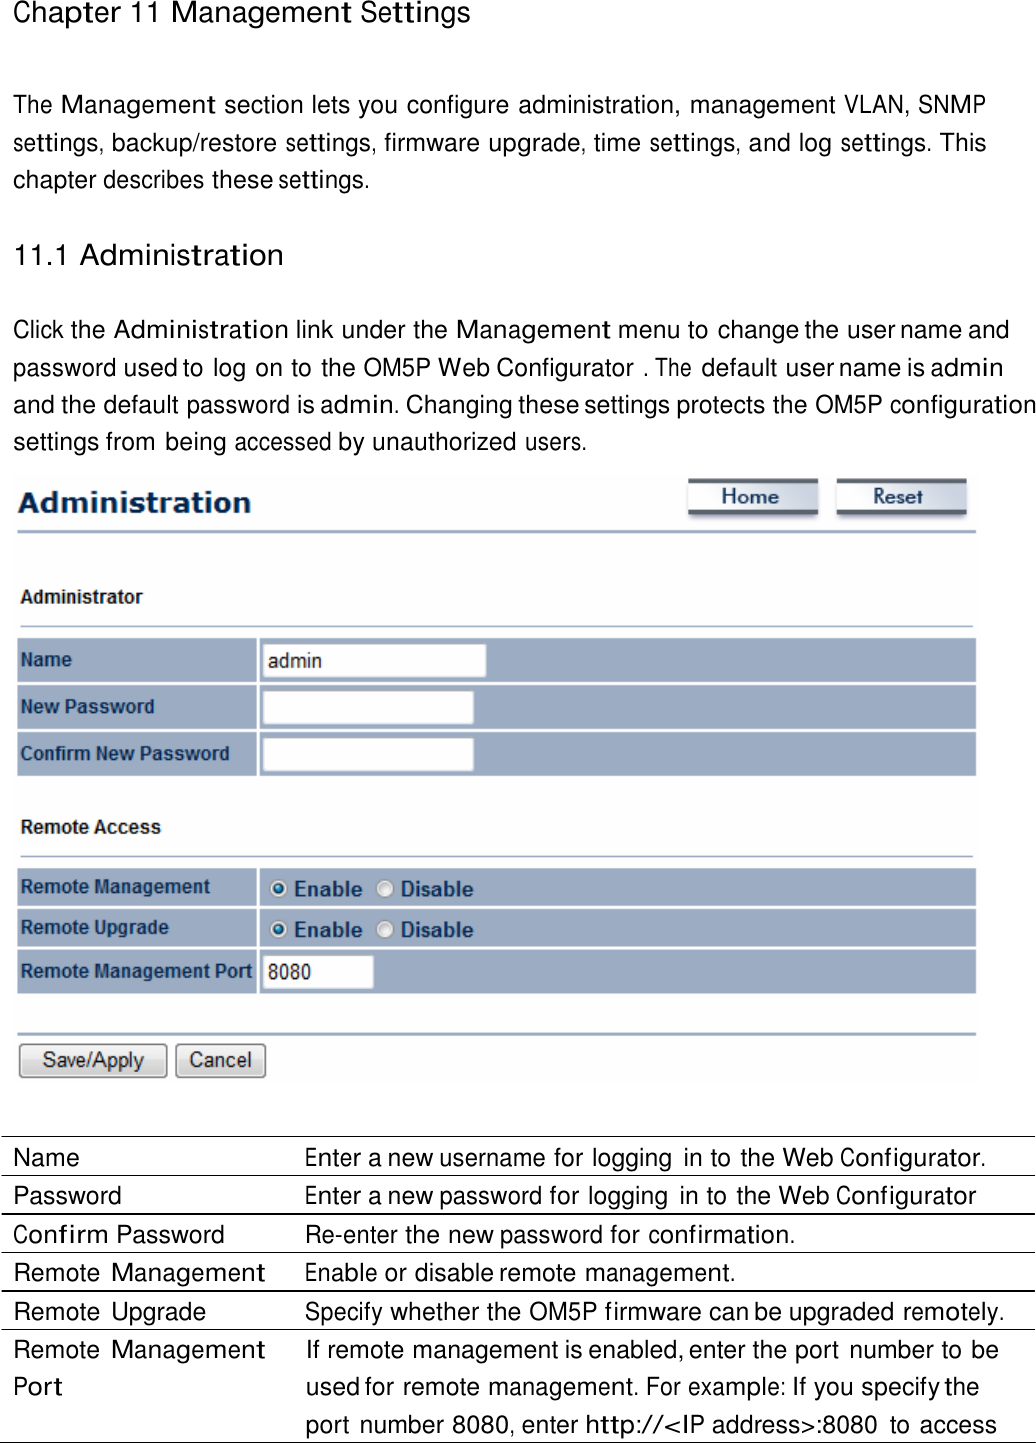 Chapter 11 Management Settings     The Management section lets you configure administration, management VLAN, SNMP settings, backup/restore settings, firmware upgrade, time settings, and log settings. This chapter describes these settings.   11.1 Administration   Click the Administration link under the Management menu to change the user name and password used to log on to the OM5P Web Configurator . The default user name is admin and the default password is admin. Changing these settings protects the OM5P configuration settings from being accessed by unauthorized users.     Name  Enter a new username for logging  in to the Web Configurator. Password  Enter a new password for logging  in to the Web Configurator Confirm Password  Re-enter the new password for confirmation. Remote Management Enable or disable remote management. Remote Upgrade  Specify whether the OM5P firmware can be upgraded remotely. Remote Management Port If remote management is enabled, enter the port number to be used for remote management. For example: If you specify the port number 8080, enter http://&lt;IP address&gt;:8080  to access 